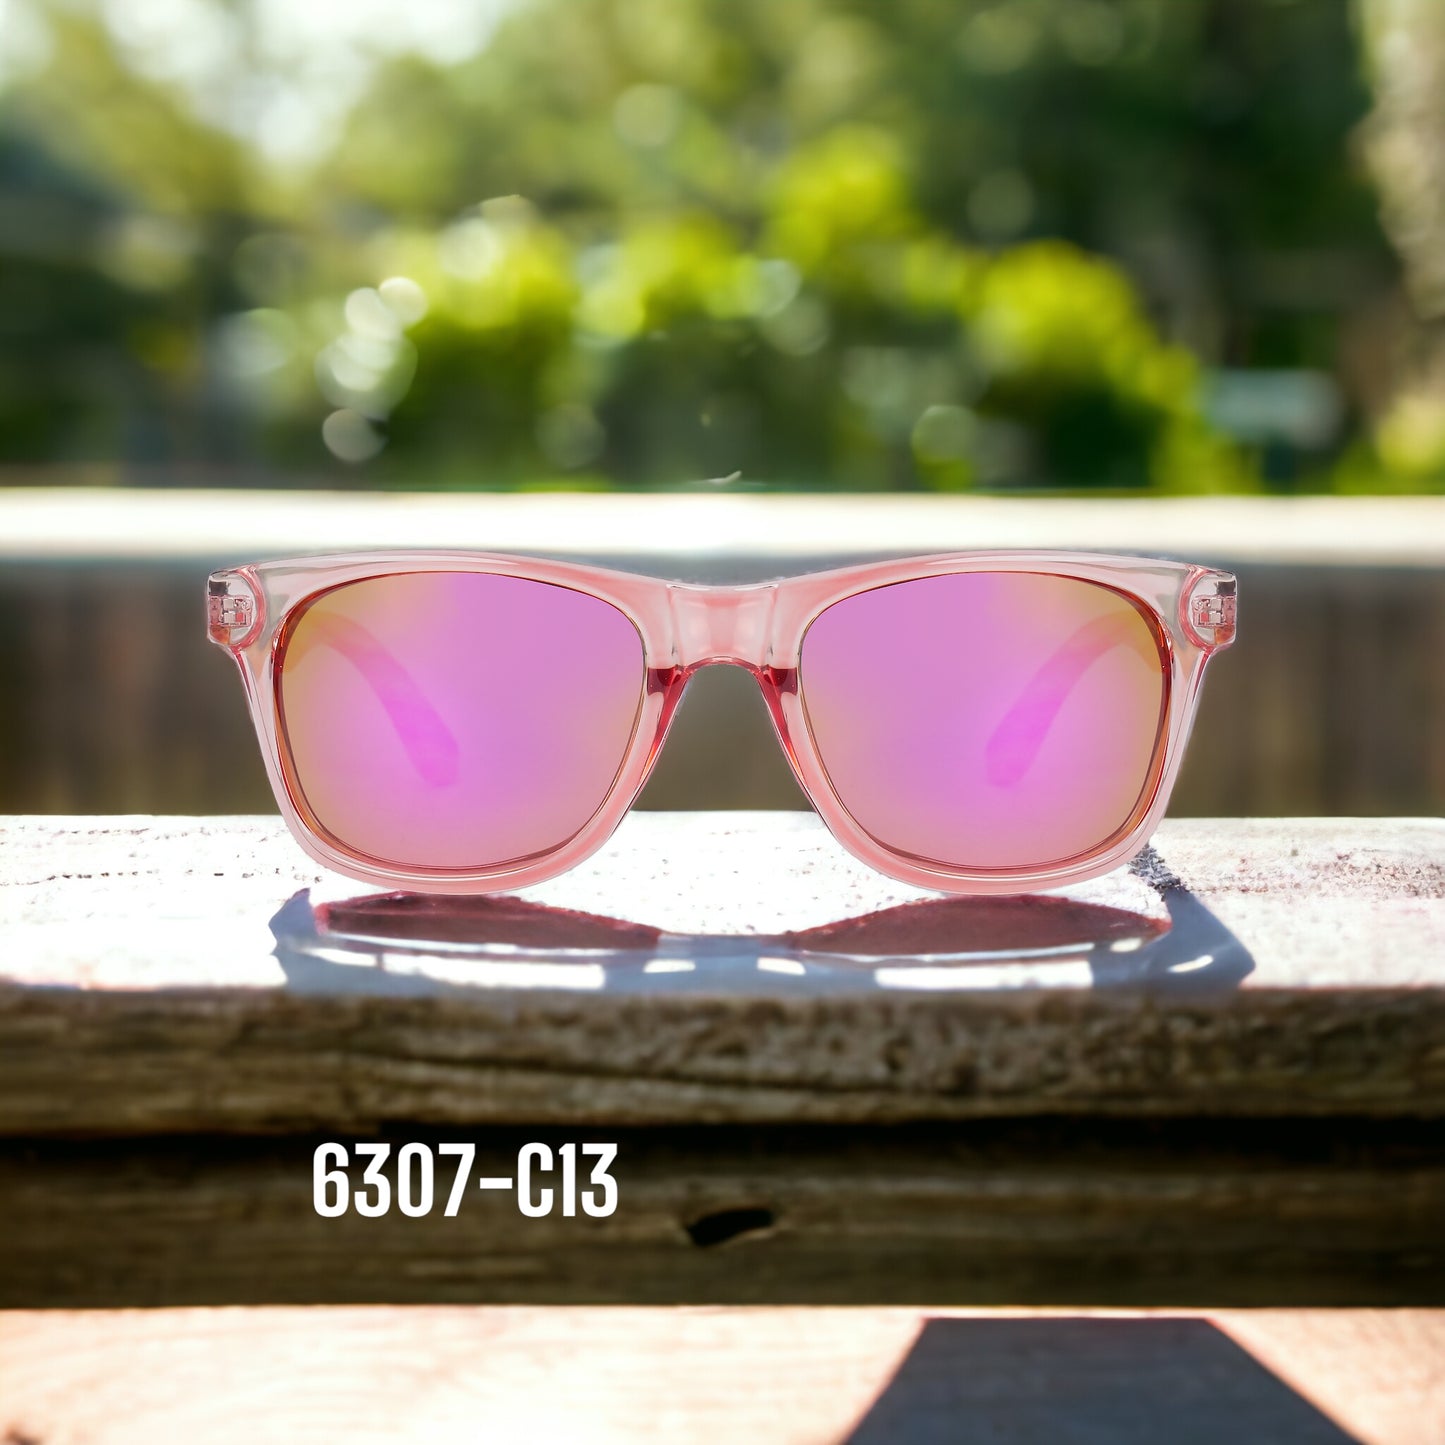 6307-C13 Stylish Sunglasses with colored Wood/Bamboo Frame UV400 Lens fit all weather